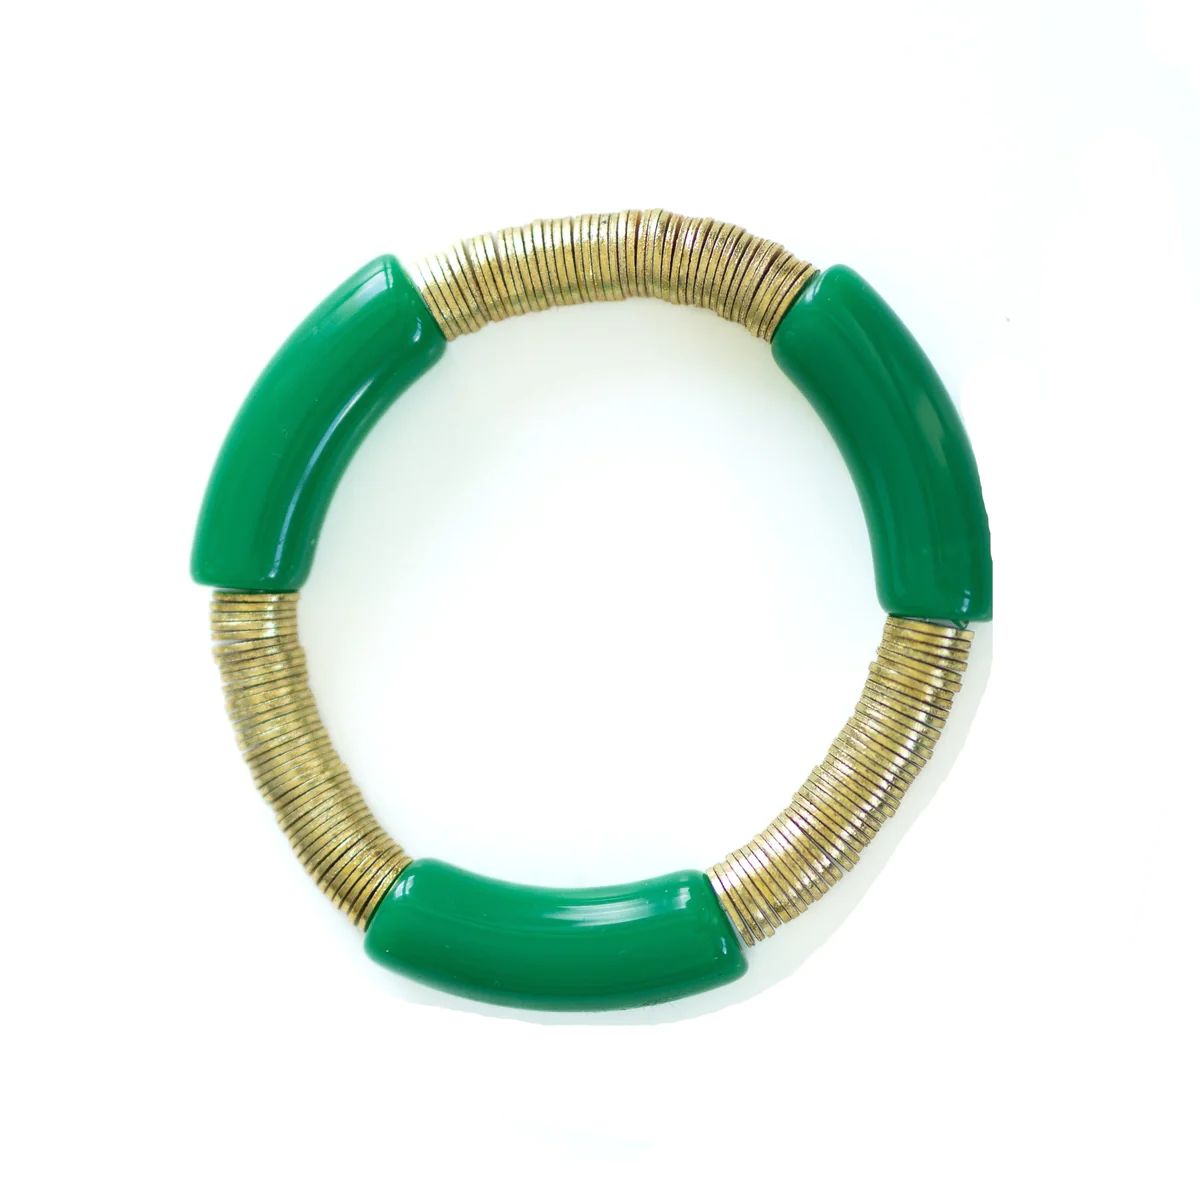 The Green and Gold Cormier | Cocos Beads and Co